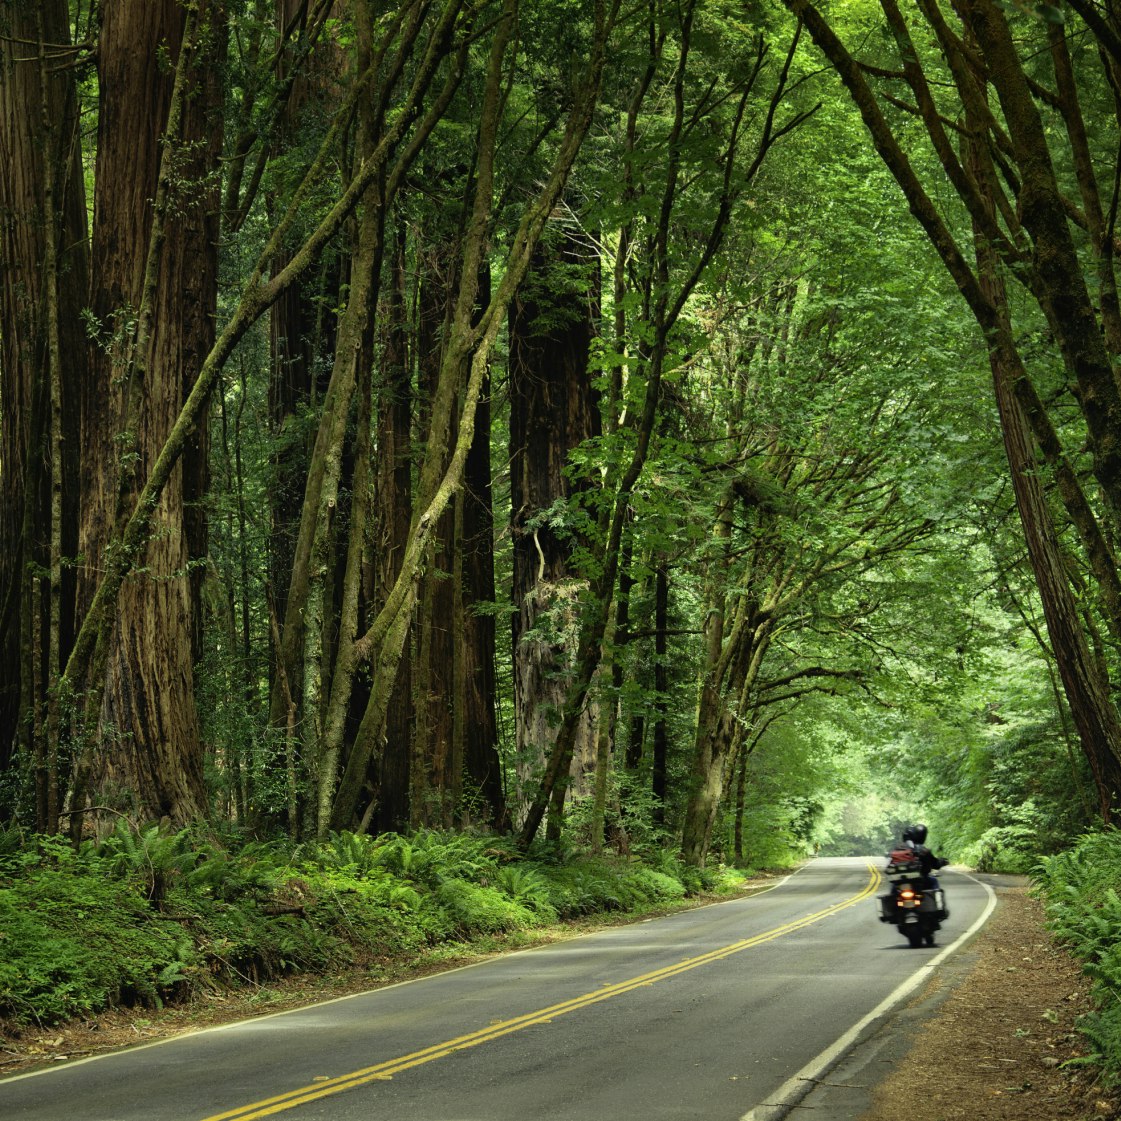 Motorcycle travelling through the redwood trees on the Avenue of the Giants in Humboldt Redwoods State Park.